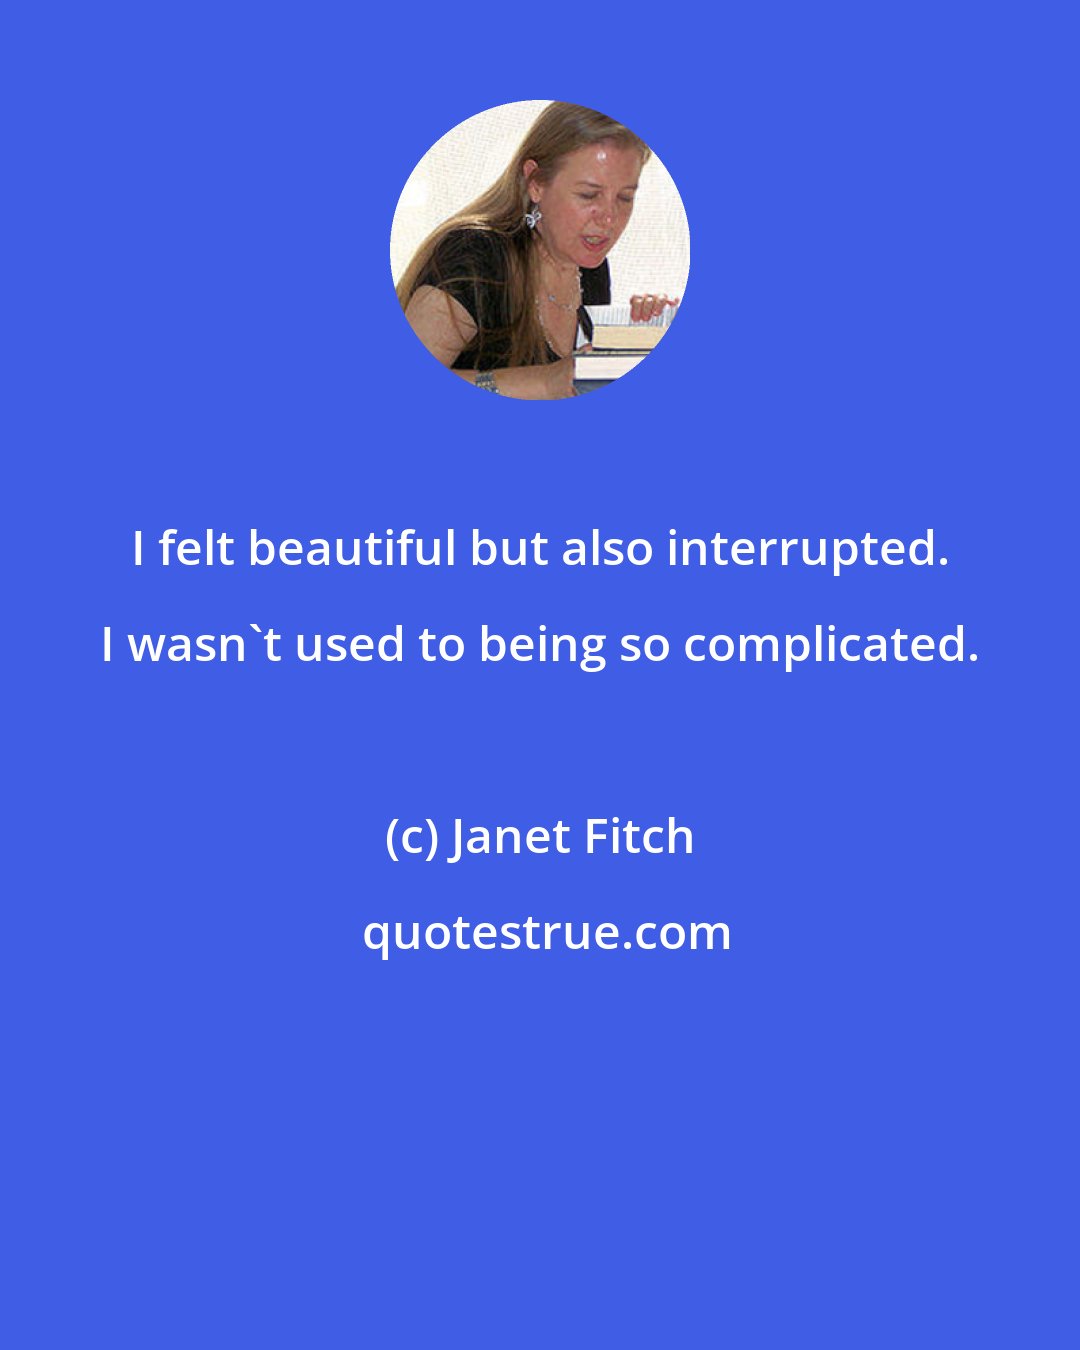 Janet Fitch: I felt beautiful but also interrupted. I wasn't used to being so complicated.